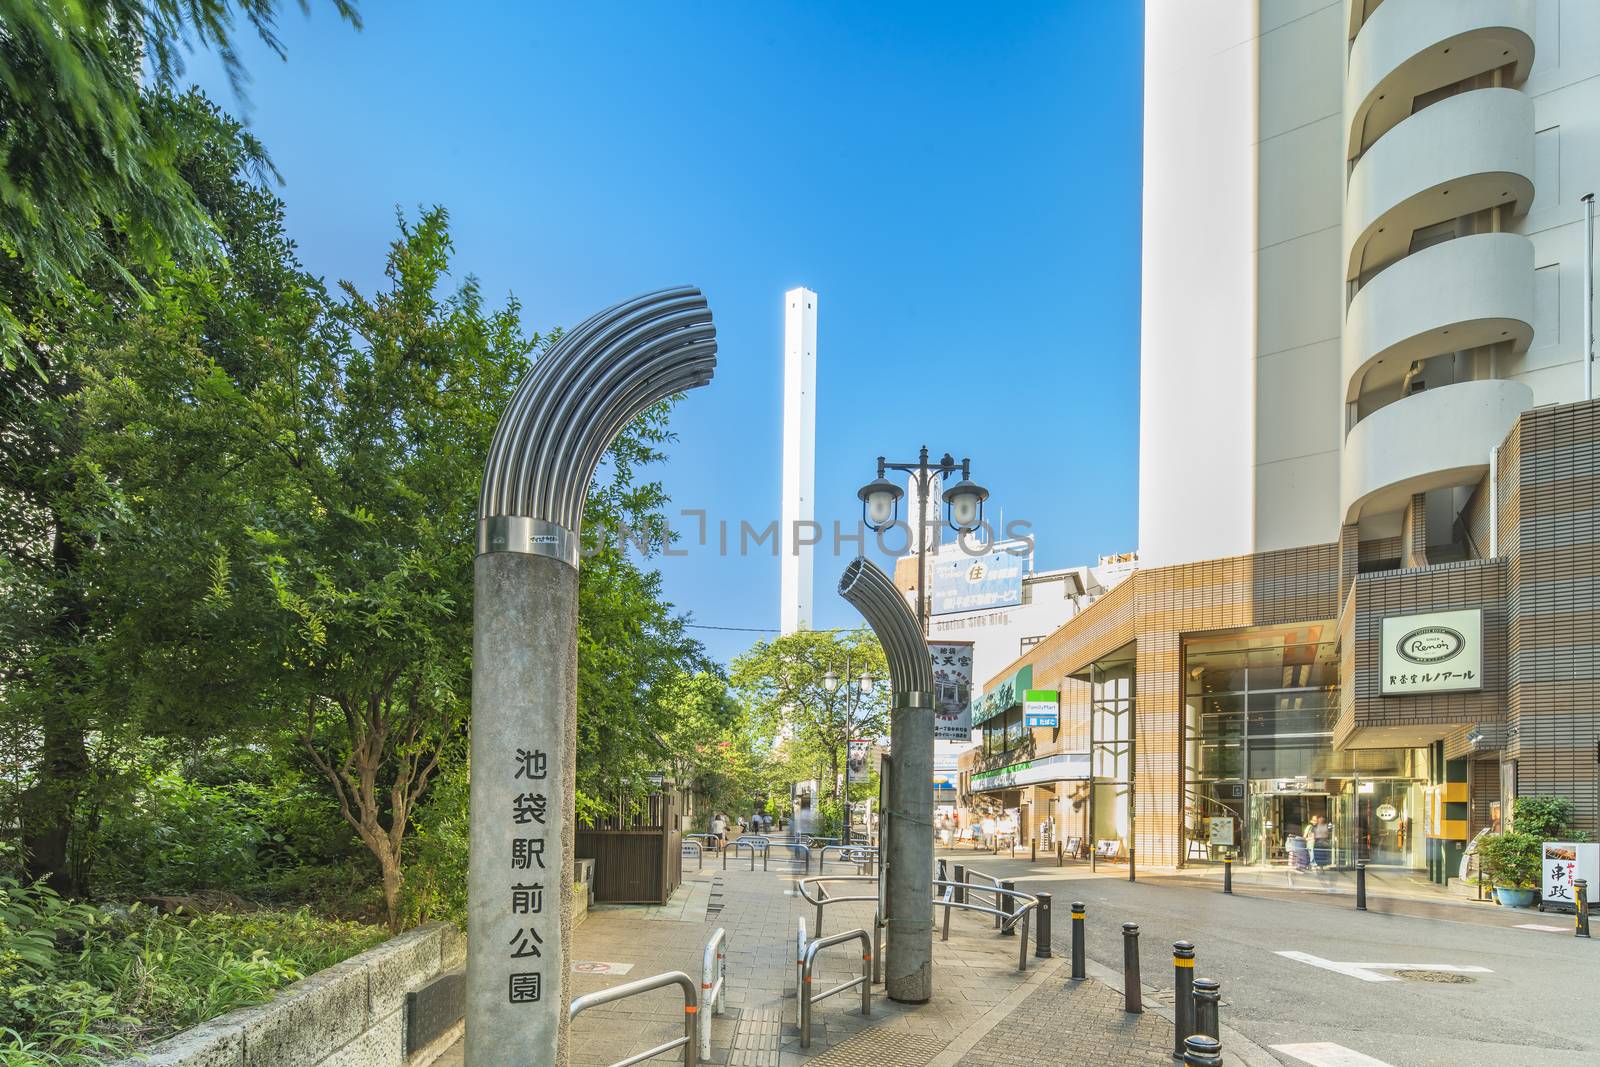 Entrance gate of the Ikebukuro Station Park with in background by kuremo